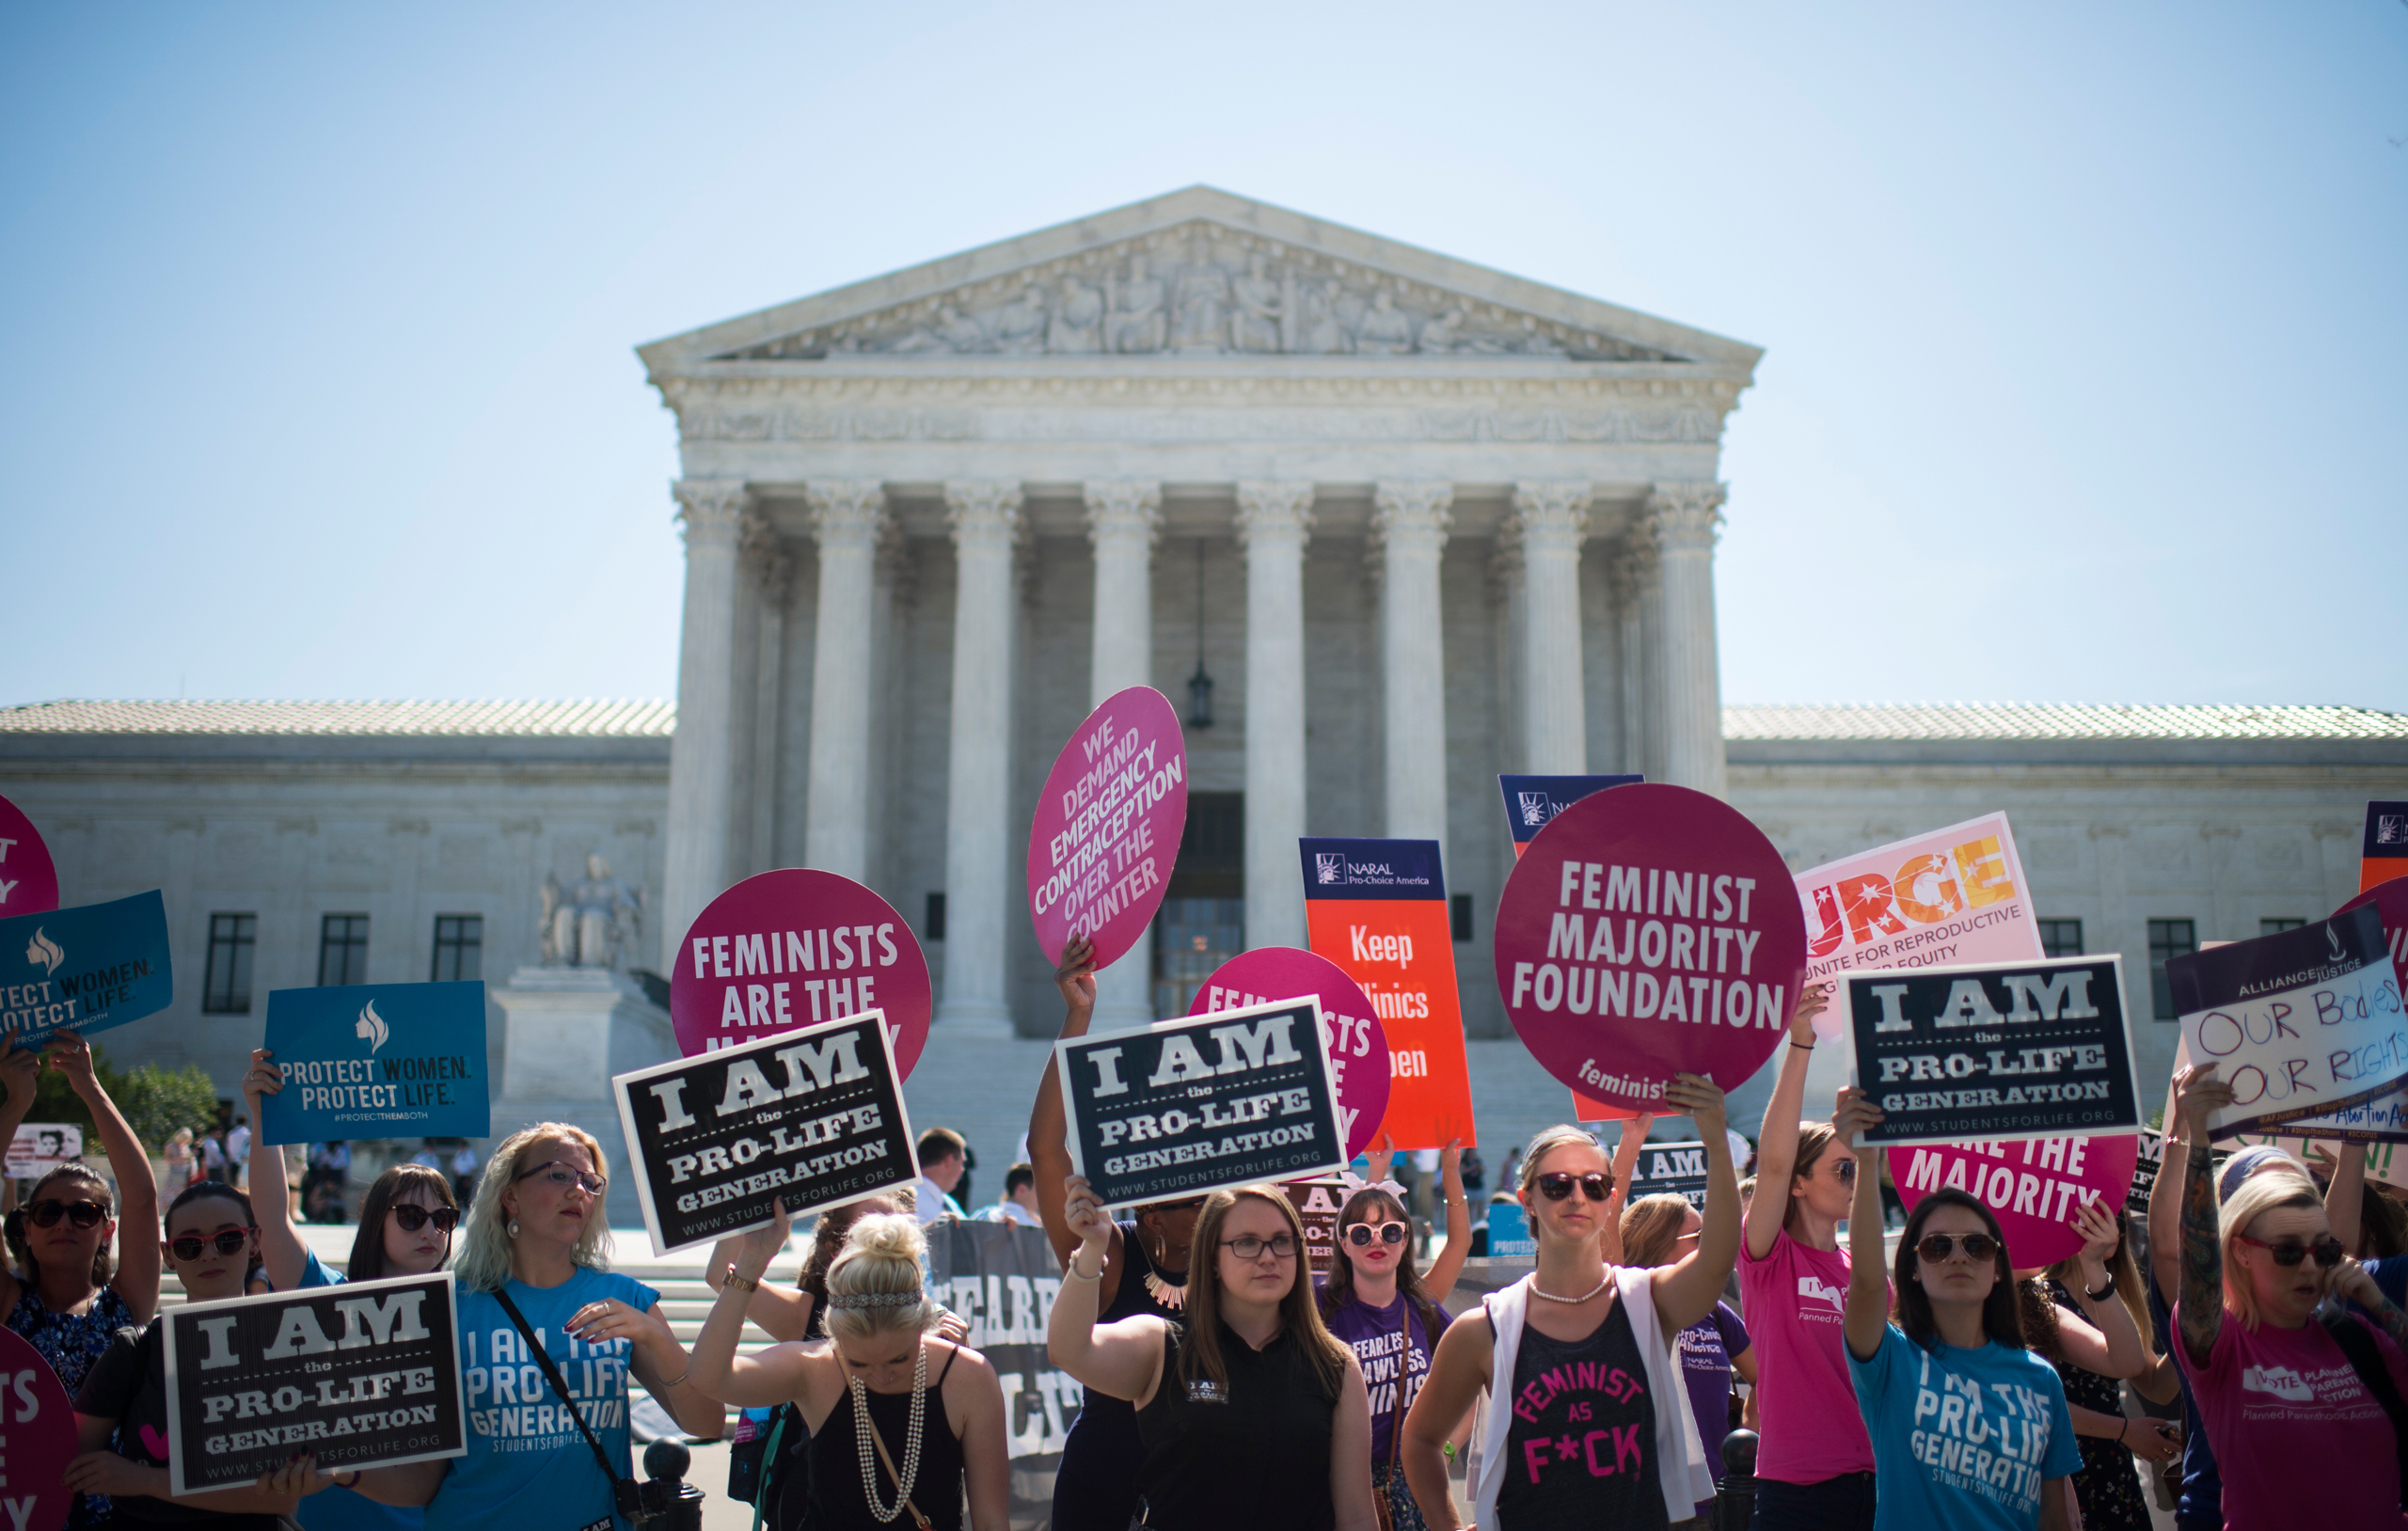 Pro-choice and pro-life demonstrators rally outside of the U.S. Supreme Court in Washington on June 20, 2016. (Bill Clark—CQ Roll Call/AP)